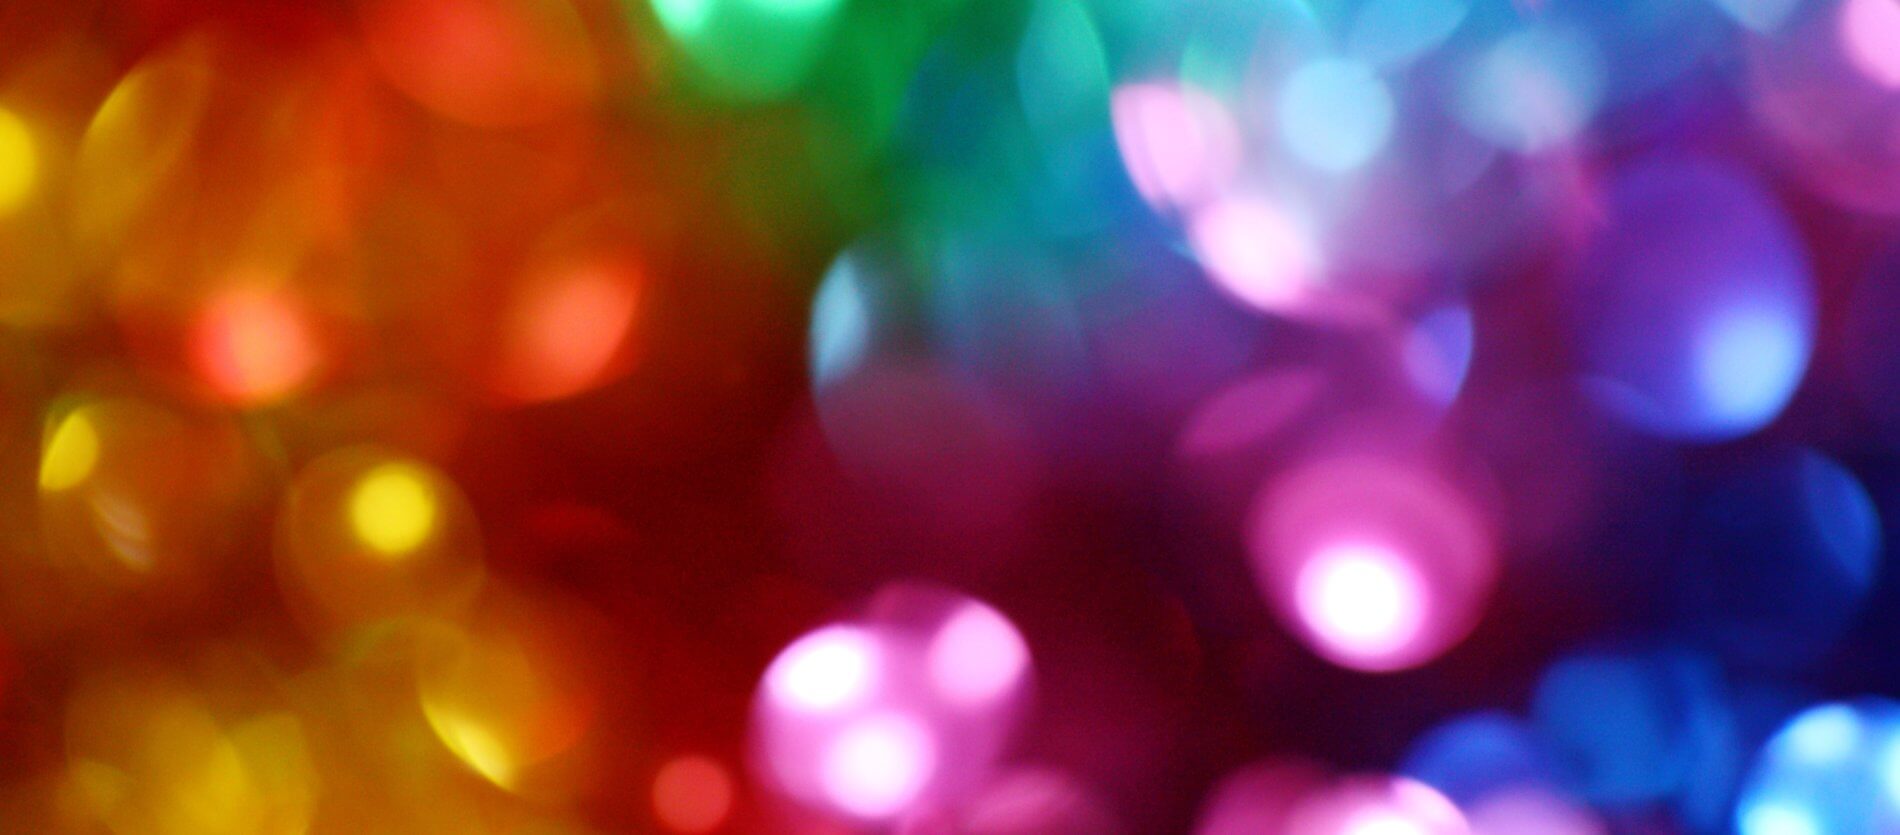 Unfocussed image of multi-coloured lights ranging from yellow through to purple